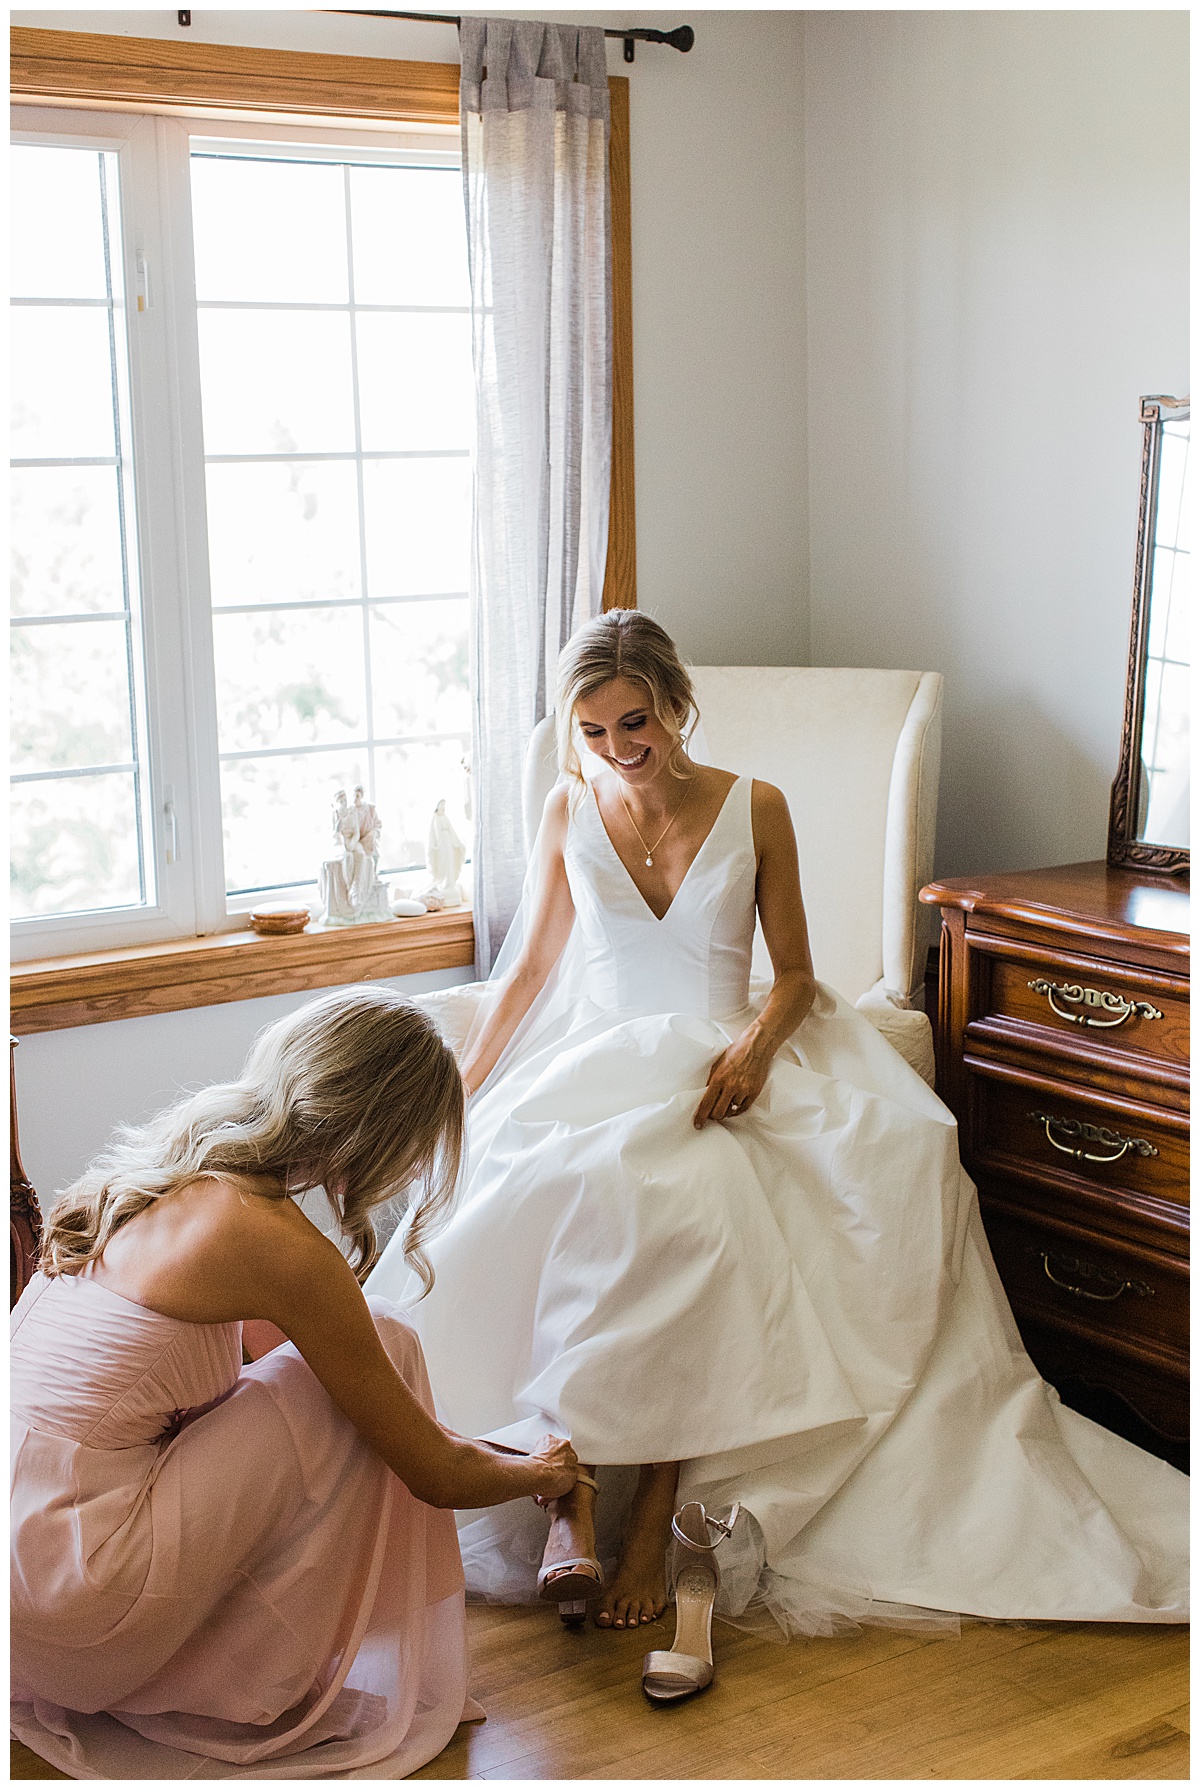 Bride sitting in chair by window while bridesmaid helps her put her bridal heels on| Georgetown, Ontario wedding| Toronto wedding photographer| 3photography